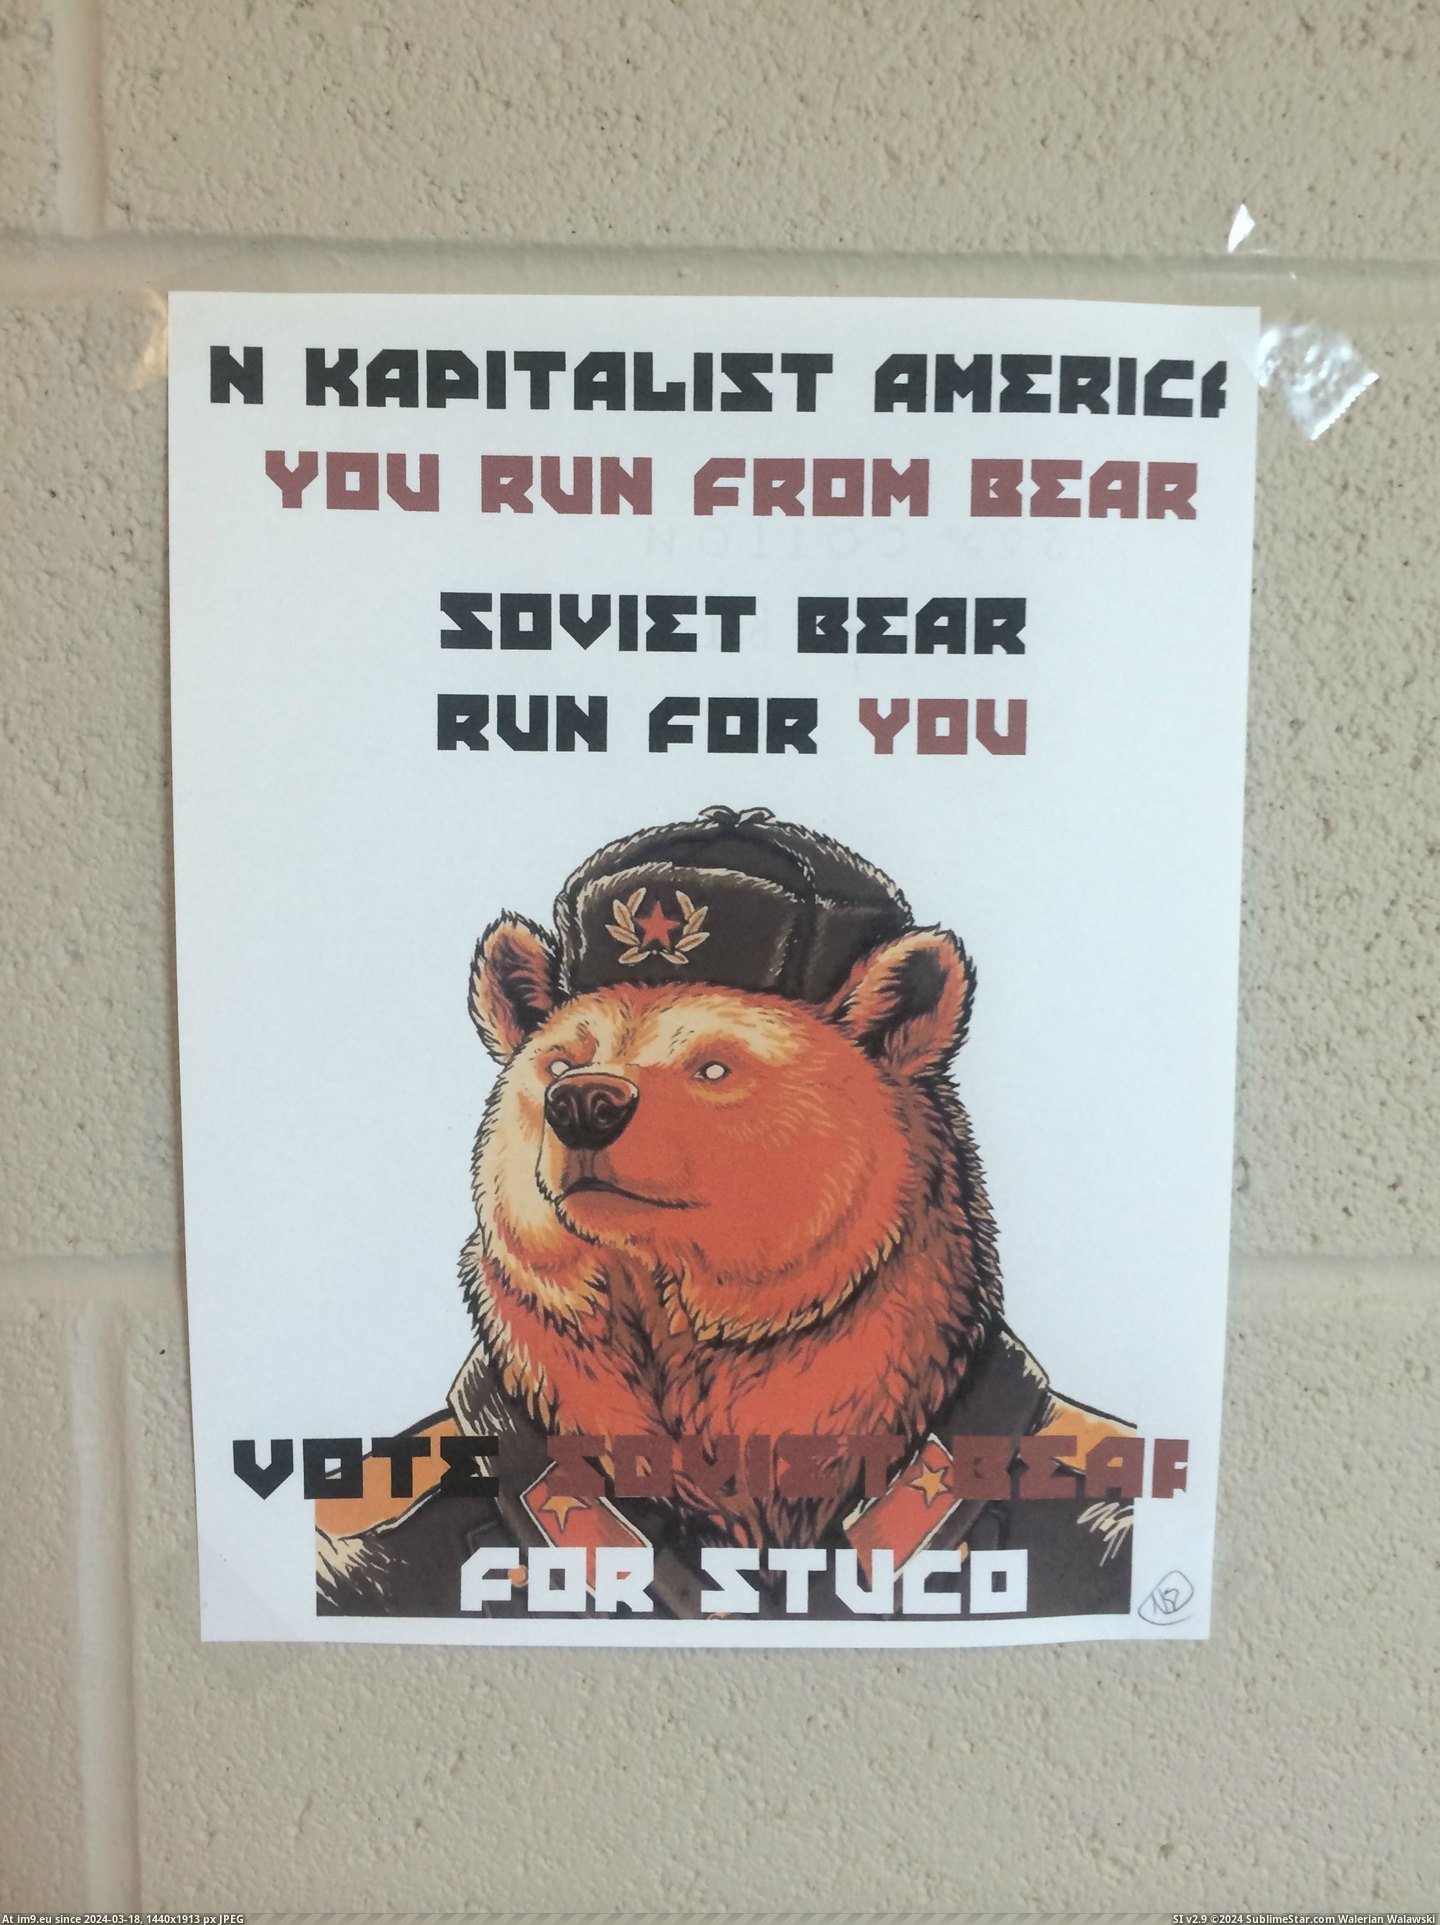 #Funny #School #Decided #Holding #Soviet #Council #Elections #Bear #Student #Run [Funny] So my school is holding elections for student council... and someone has decided to run as Soviet Bear 12 Pic. (Image of album My r/FUNNY favs))